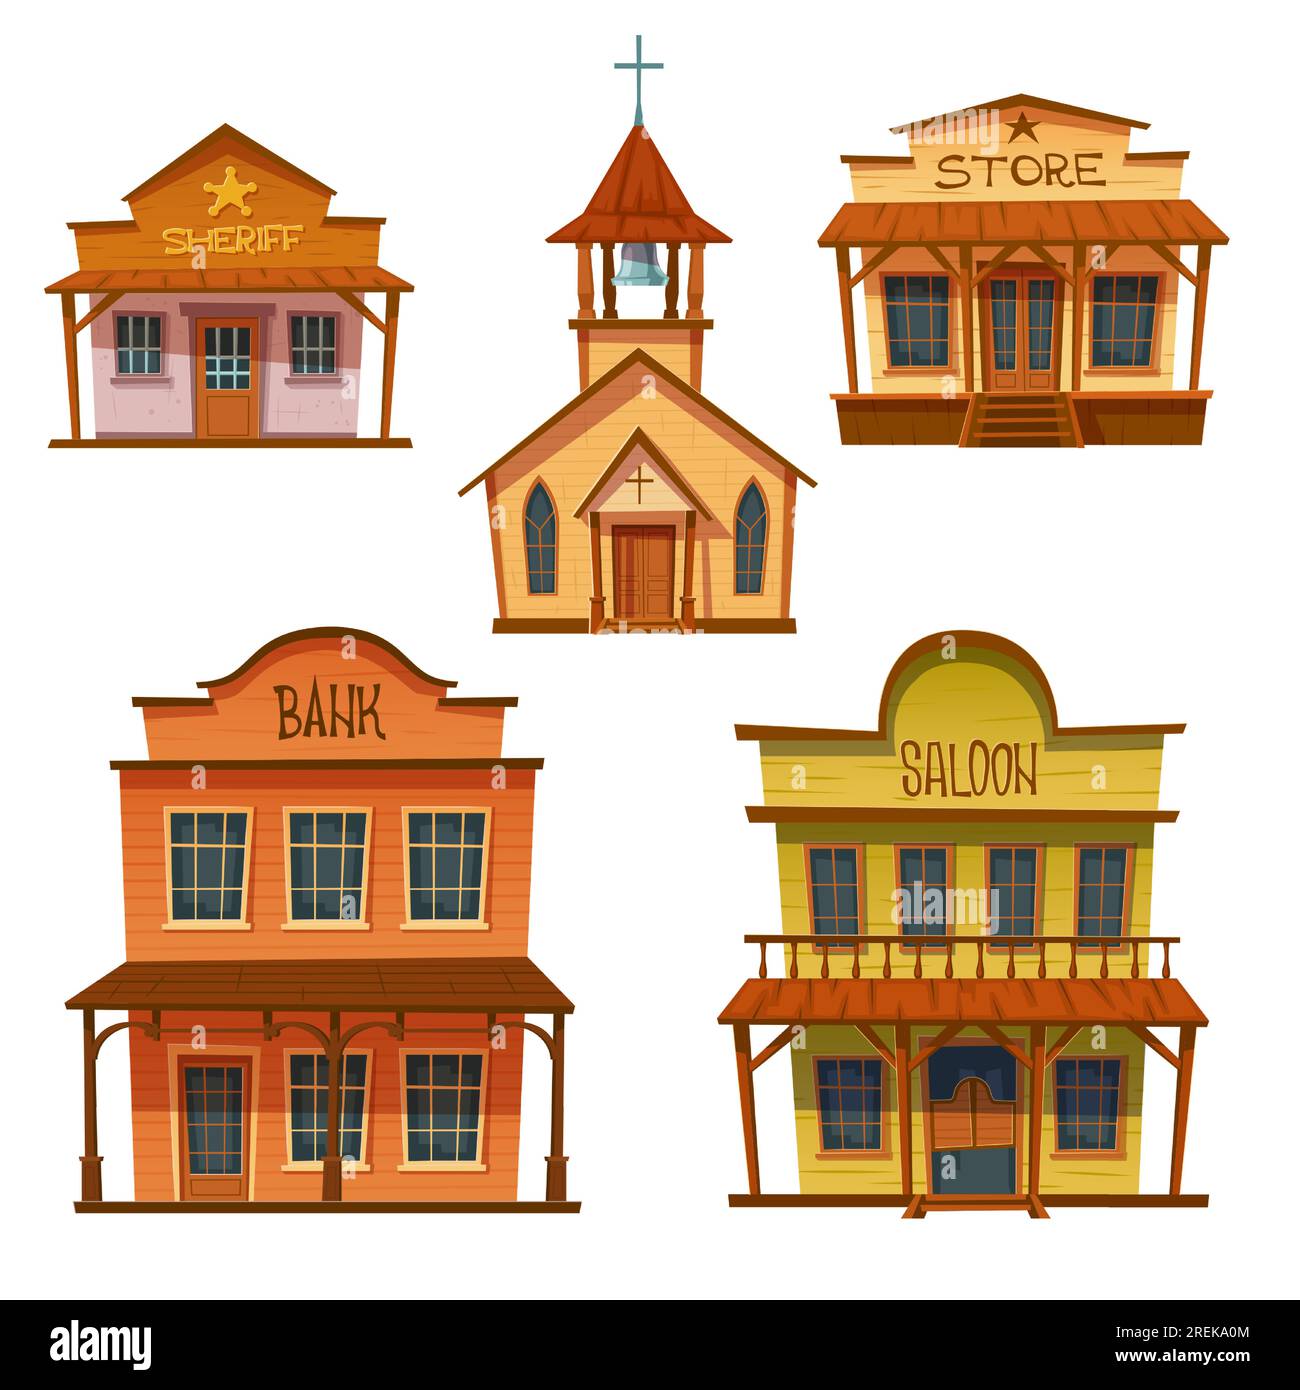 Wild west buildings set. Church, saloon, bank, sheriff and store wooden traditional western architecture isolated on white background. House exterior, cowboy style design, Cartoon vector clip art Stock Vector